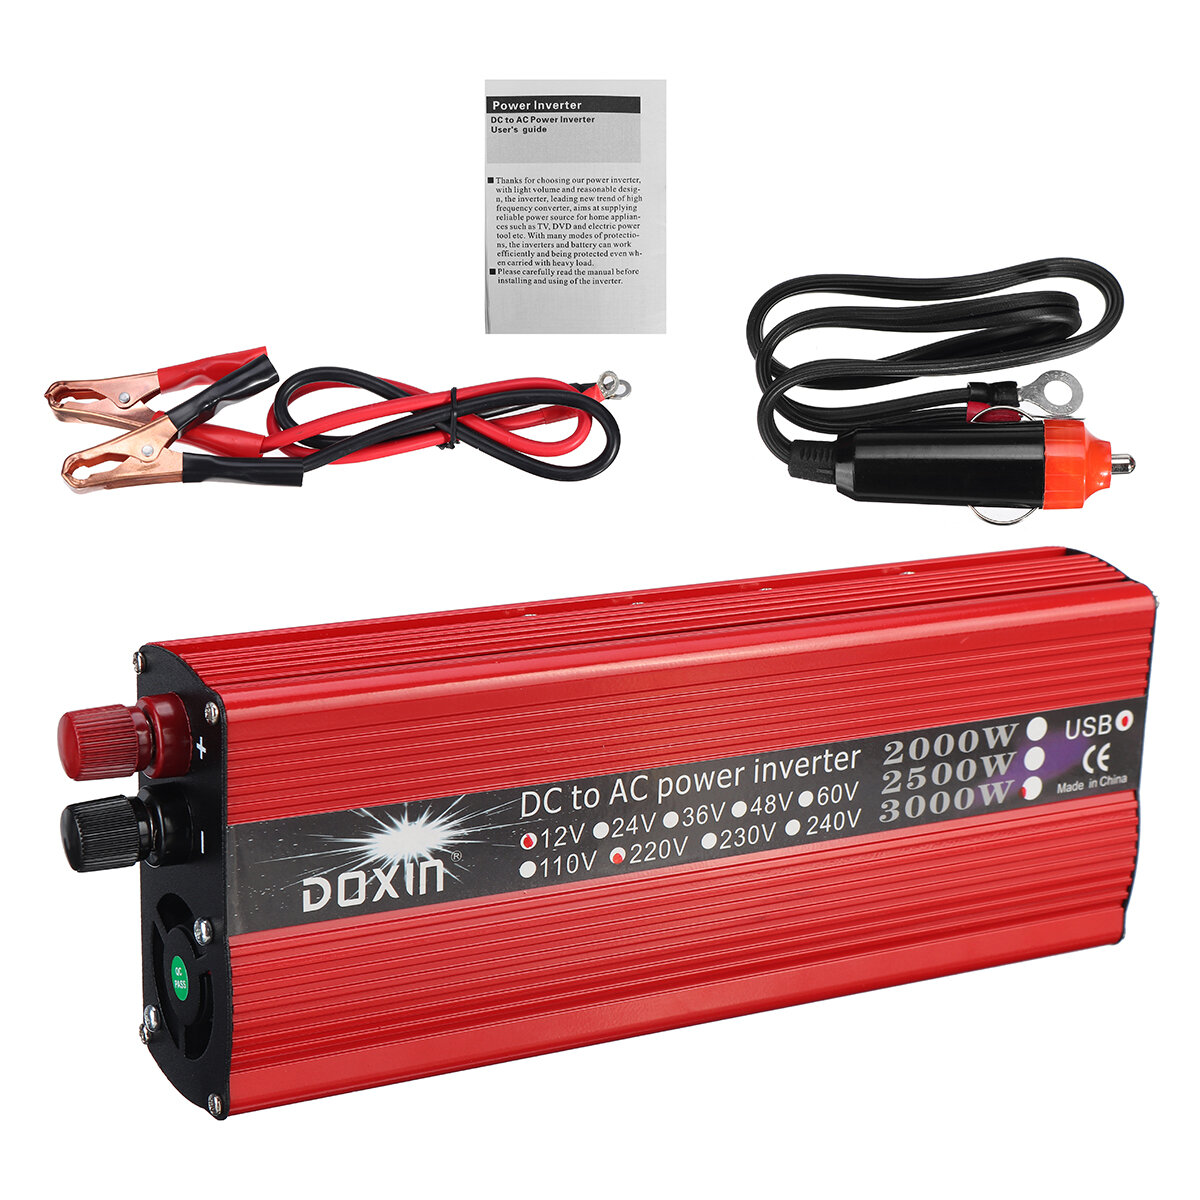 Image of 3000W DC To AC Power Inverter 110/220V Dual USB Ports Modified Sine Wave Solar Photovoltaic Power Converter